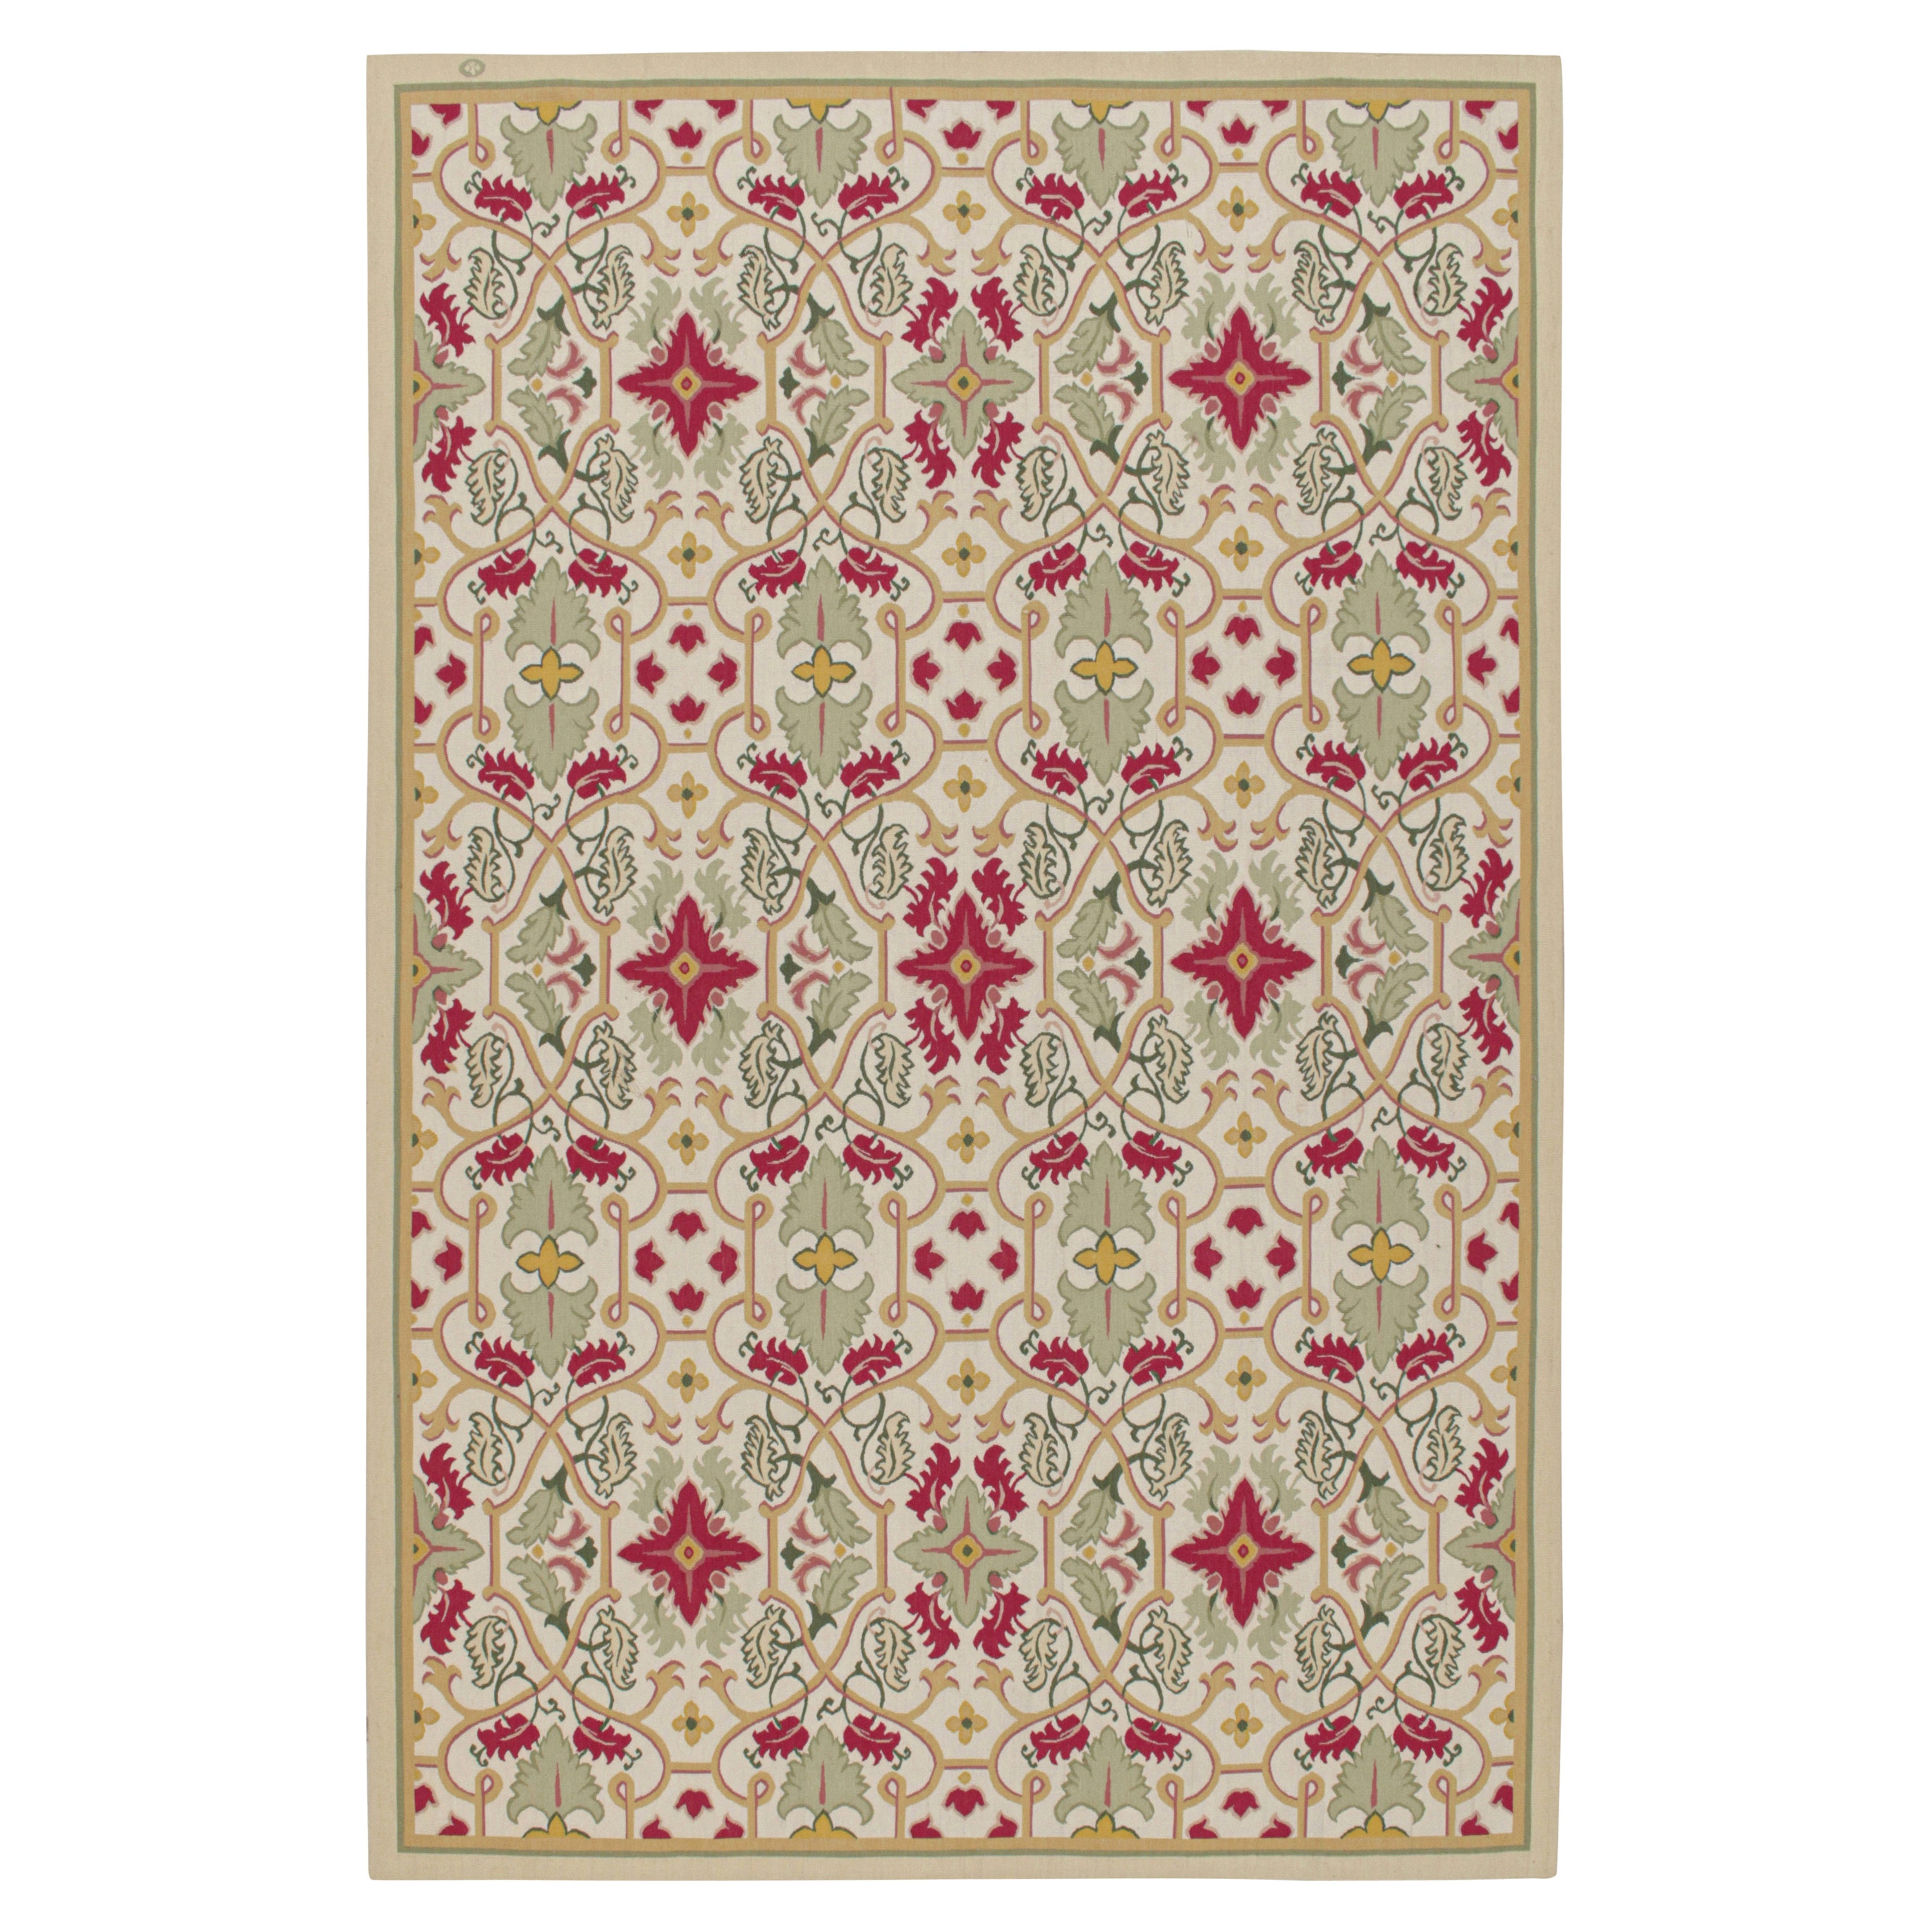 Aubusson Style Flatweave with Green and Red Floral Patterns